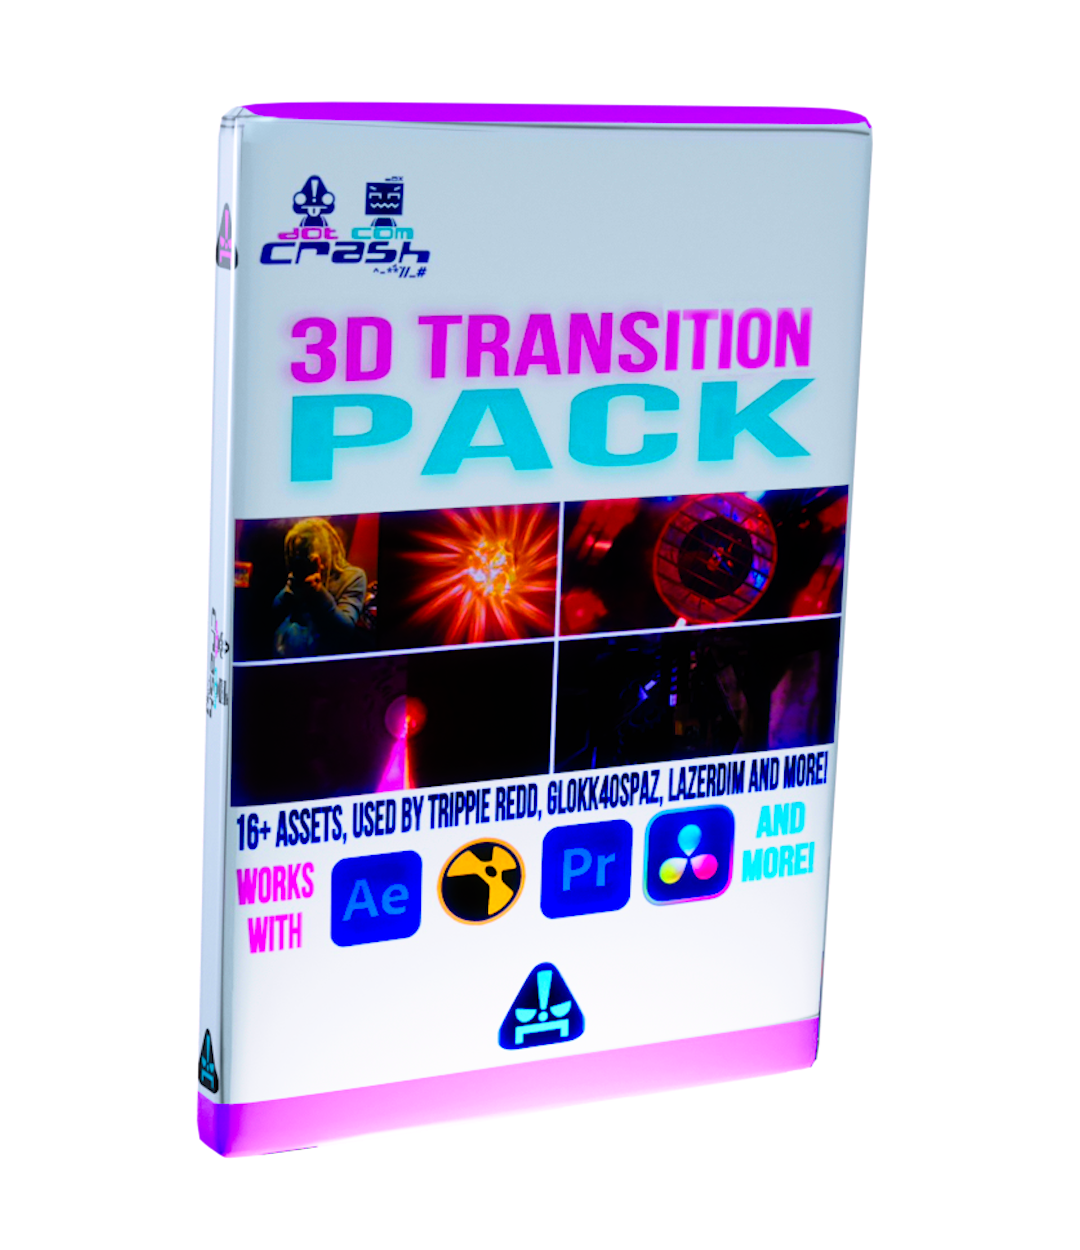 3D Transitions Pack